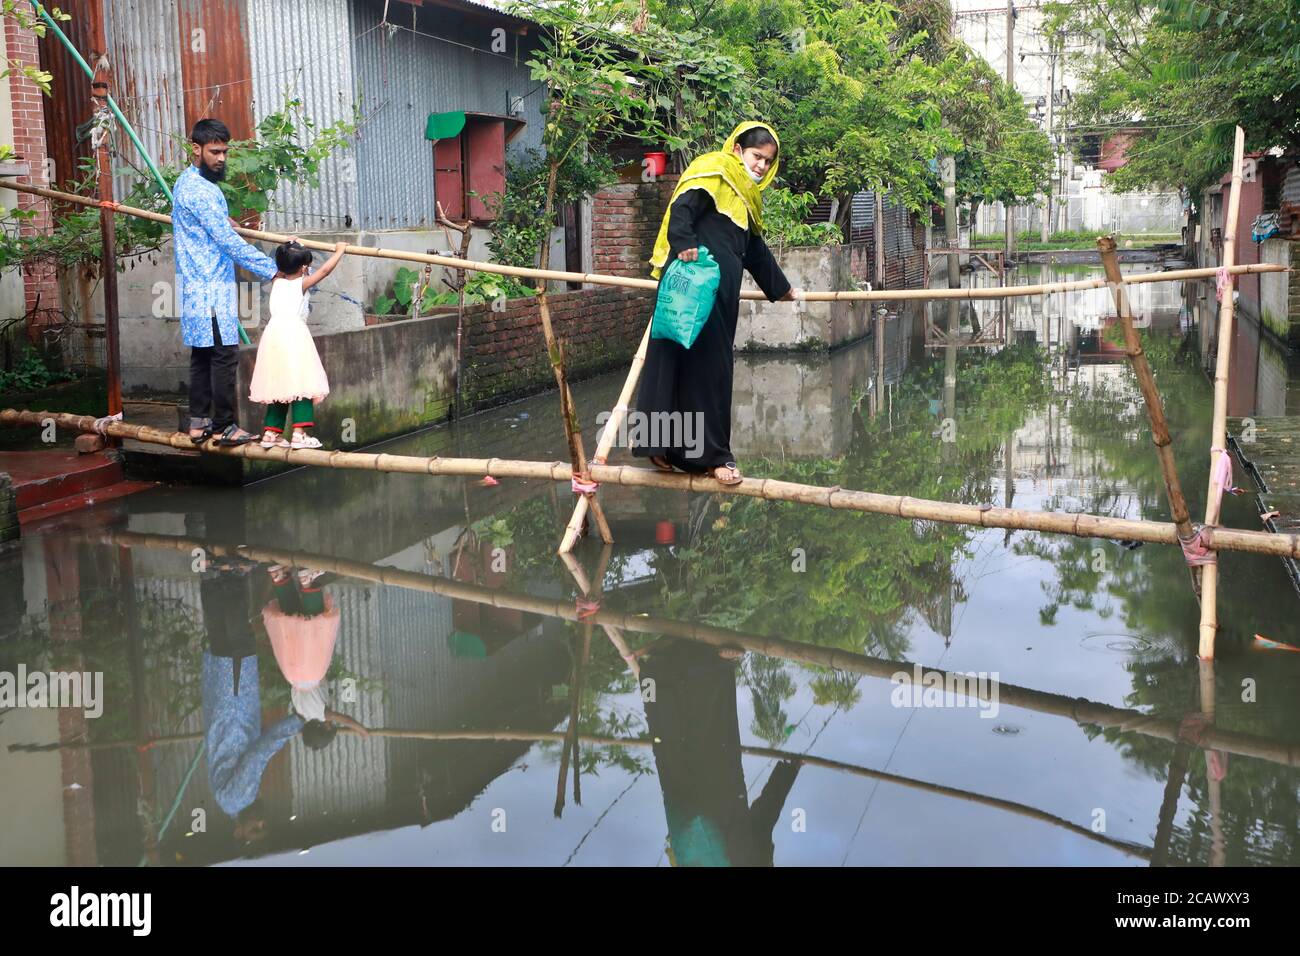 Narayanganj, Bangladesh - August 09, 2020: Bamboo bridges have become the only means of transportation for the people of the waterlogged BSCIC Jamdai Stock Photo